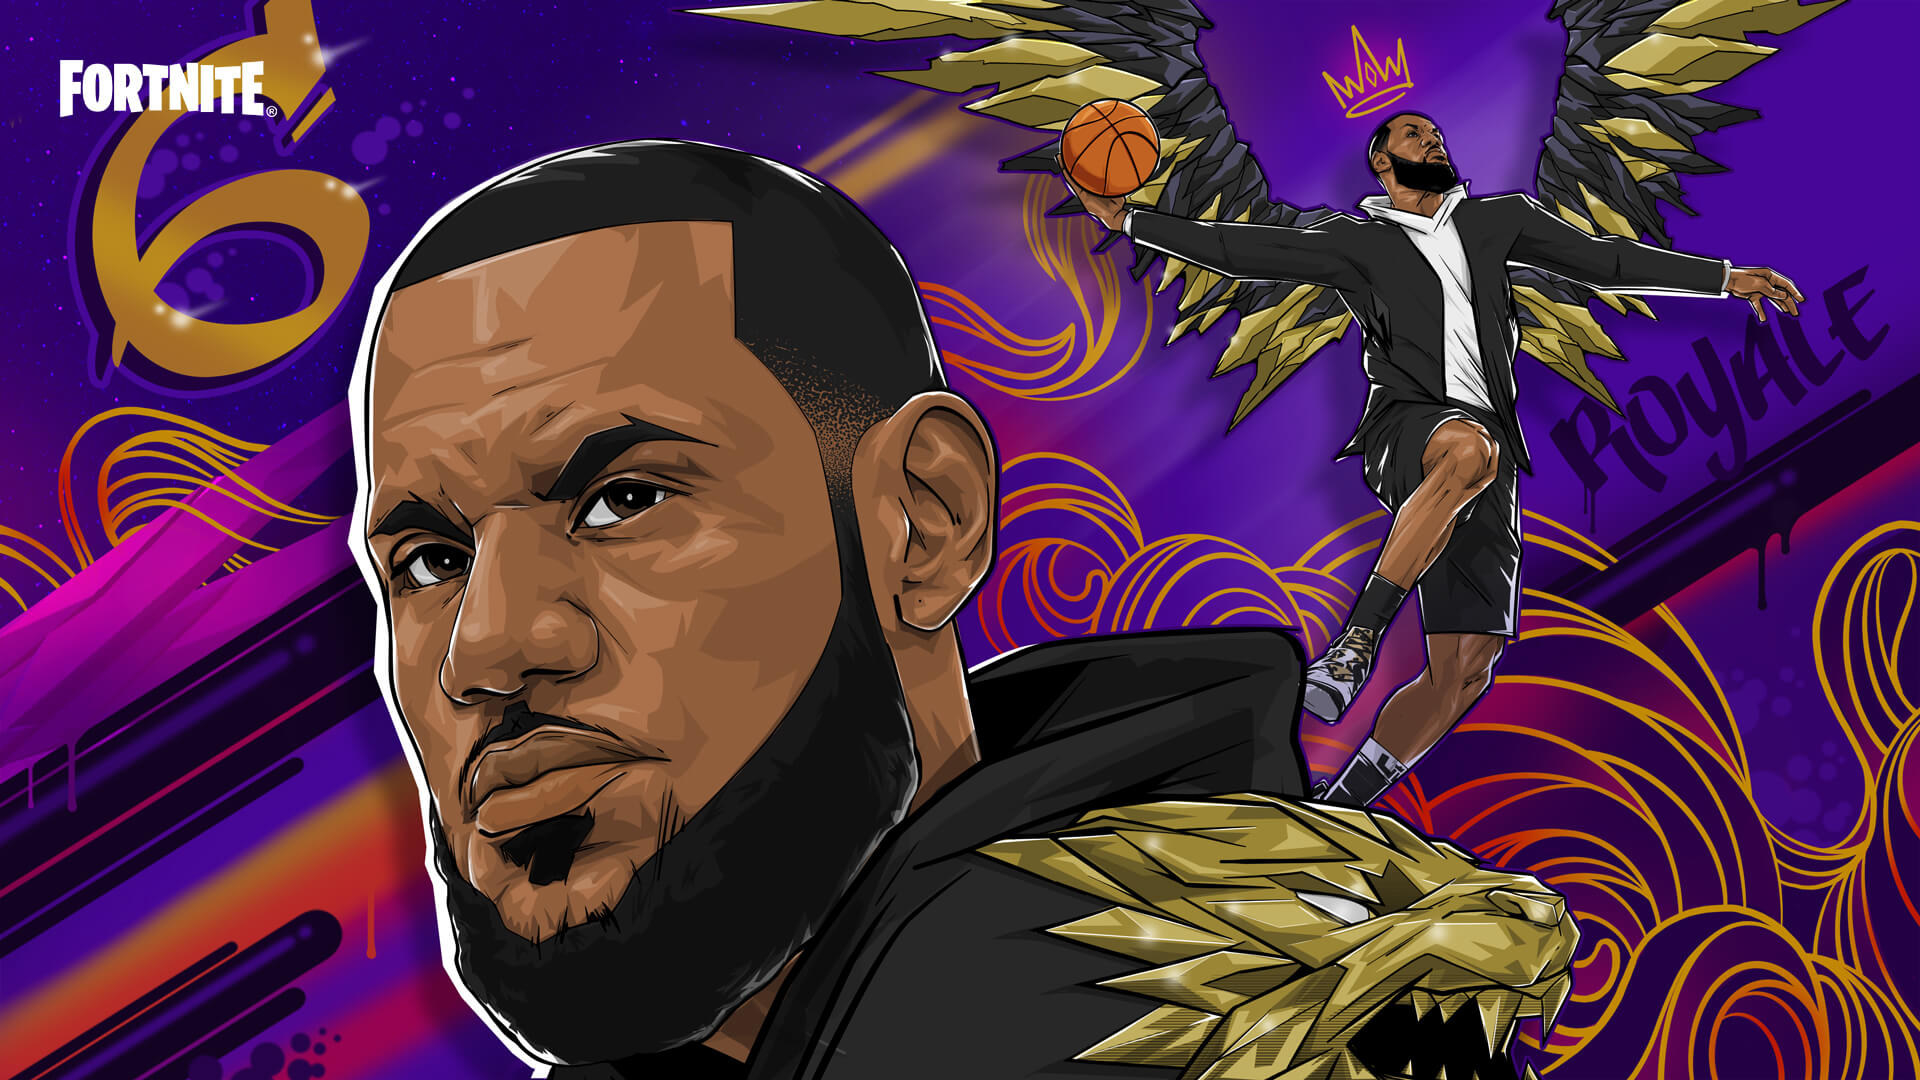 The LeBron James loading screen from the Fortnite game featuring an artistic mural of his face on a purple background.